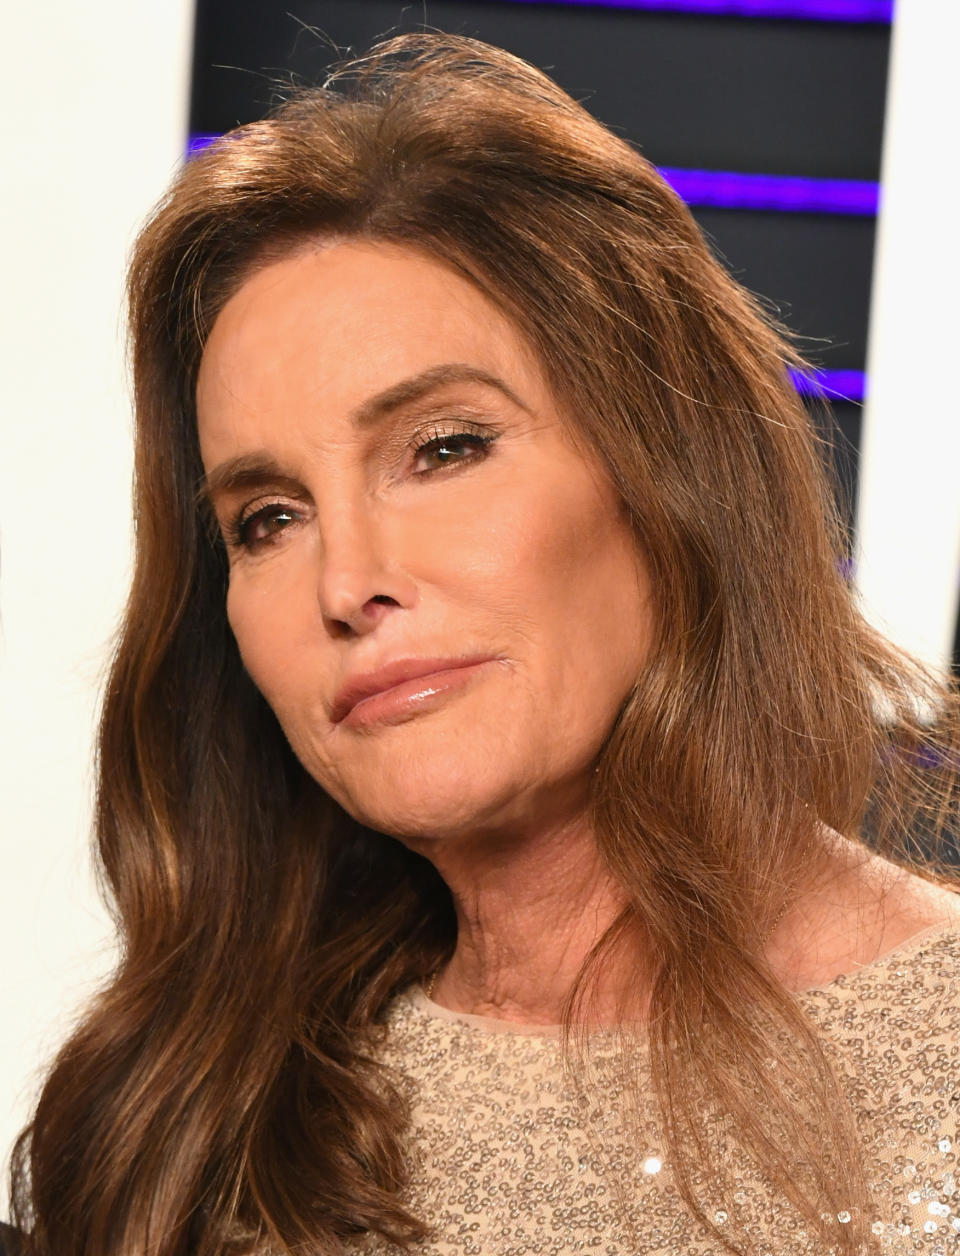 Caitlyn Jenner. Source: Getty Images